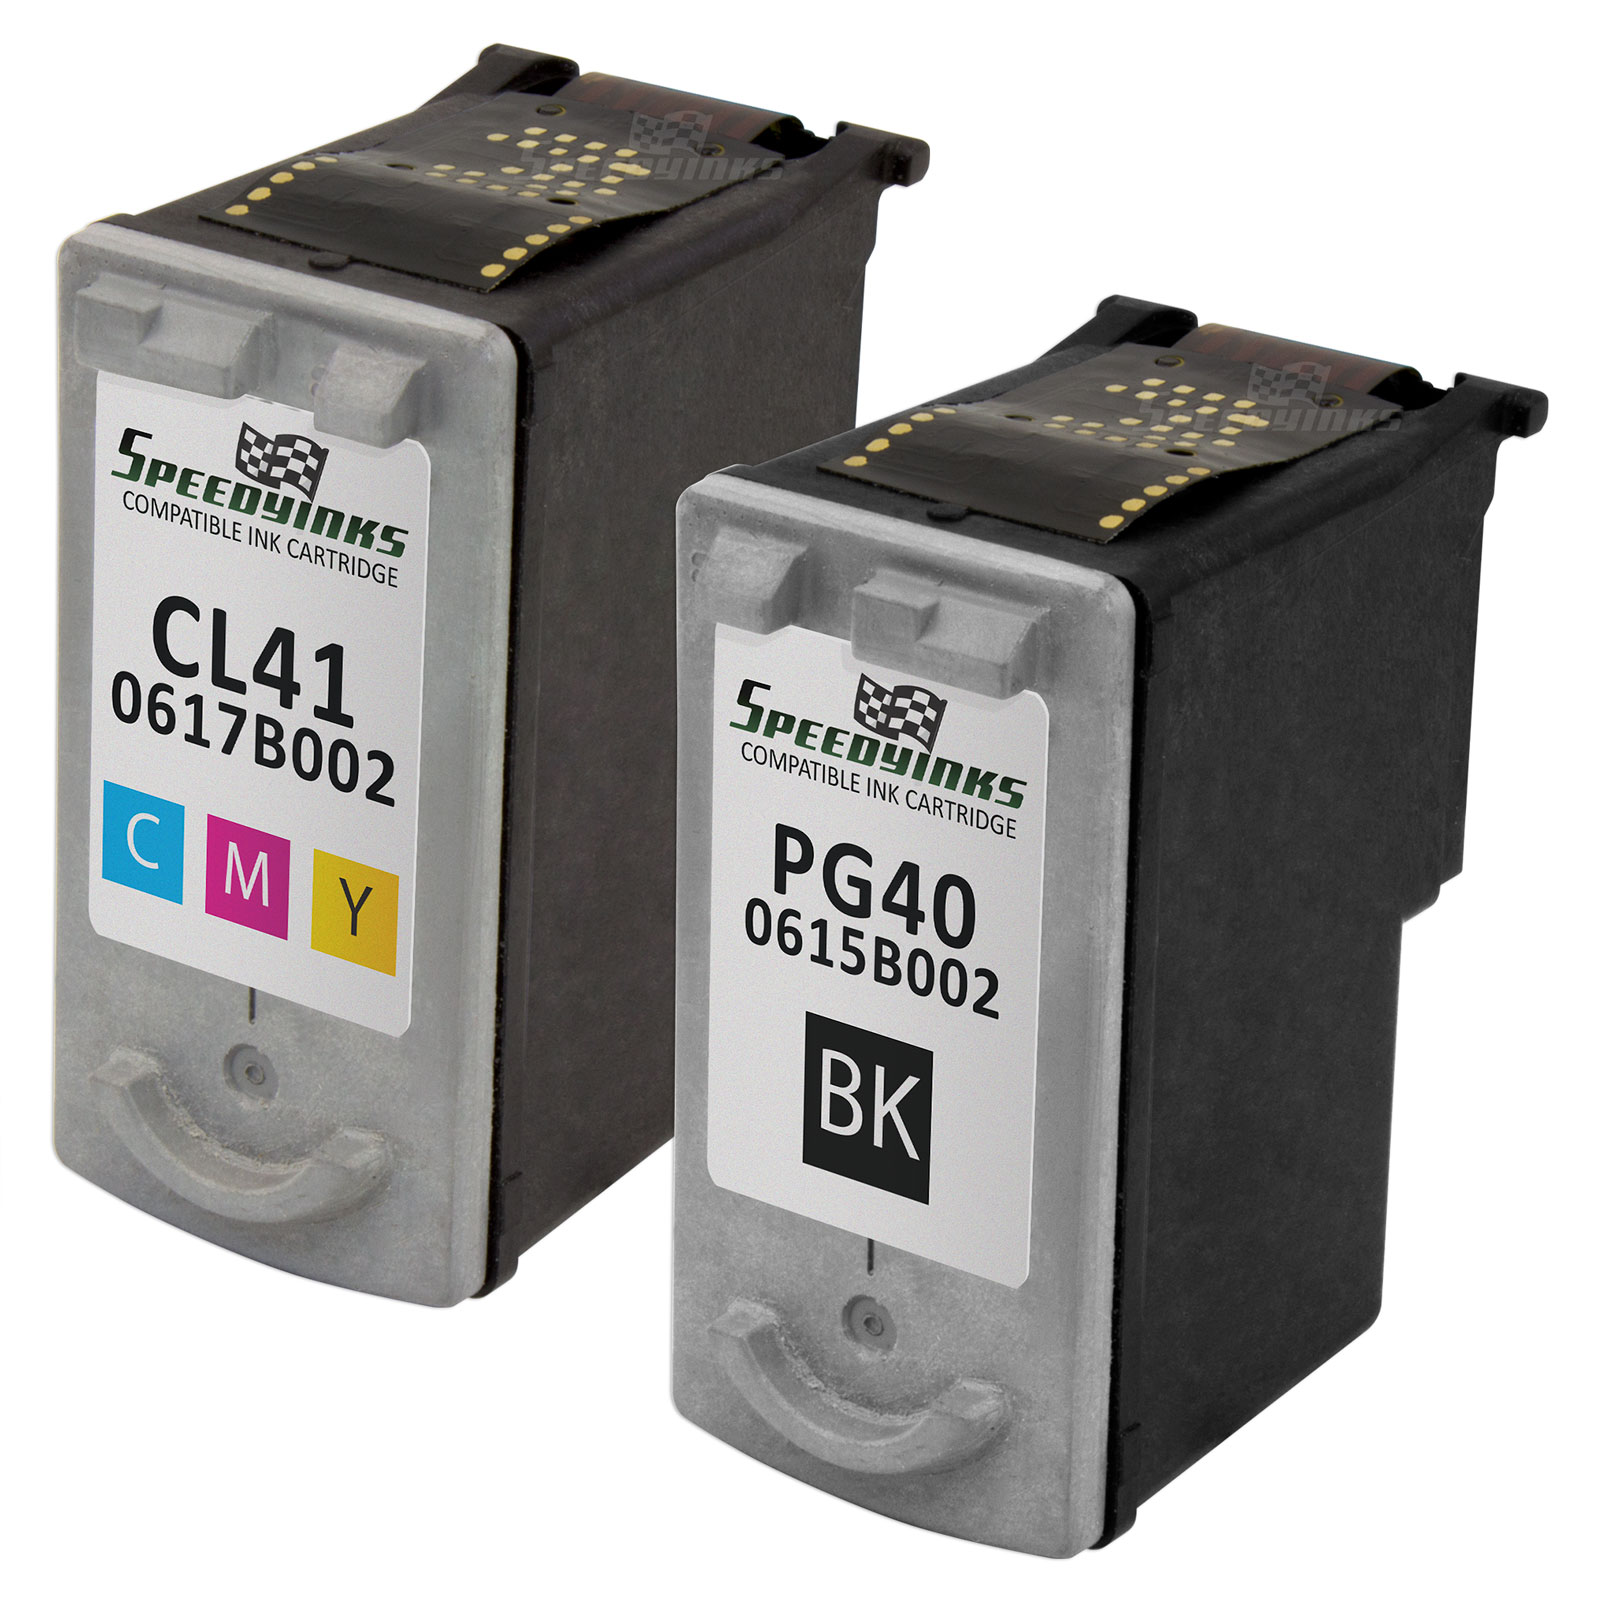 Remanufactured Canon PG40  CL41 Cartridges For Canon PIXMA iP1700, PIXMA  MP460, PIXMA MP450, PIXMA MP140, PIXMA MP180, PIXMA MP190, PIXMA iP2600,  Fax Series JX200, PIXMA MP170